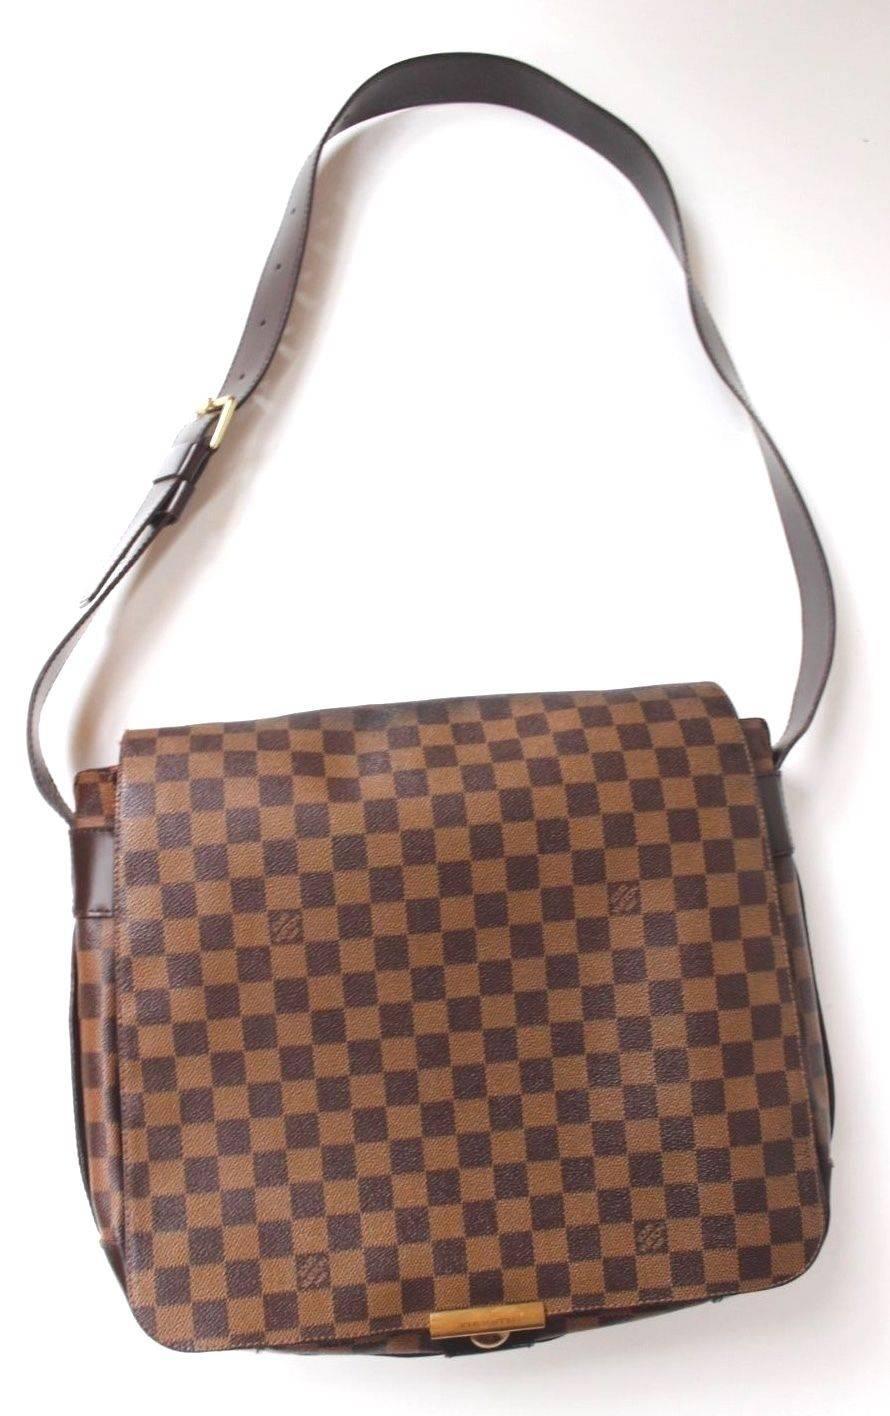 Louis Vuitton Damier Ebene Canvas Bastille Messenger Bag
This is an authentic Louis Vuitton Damier Ebene Canvas Bastille Messenger Bag. 
Made in damier canvas, this shoulder bag features gold- tone hardware and a hook closure. 
There is an exterior